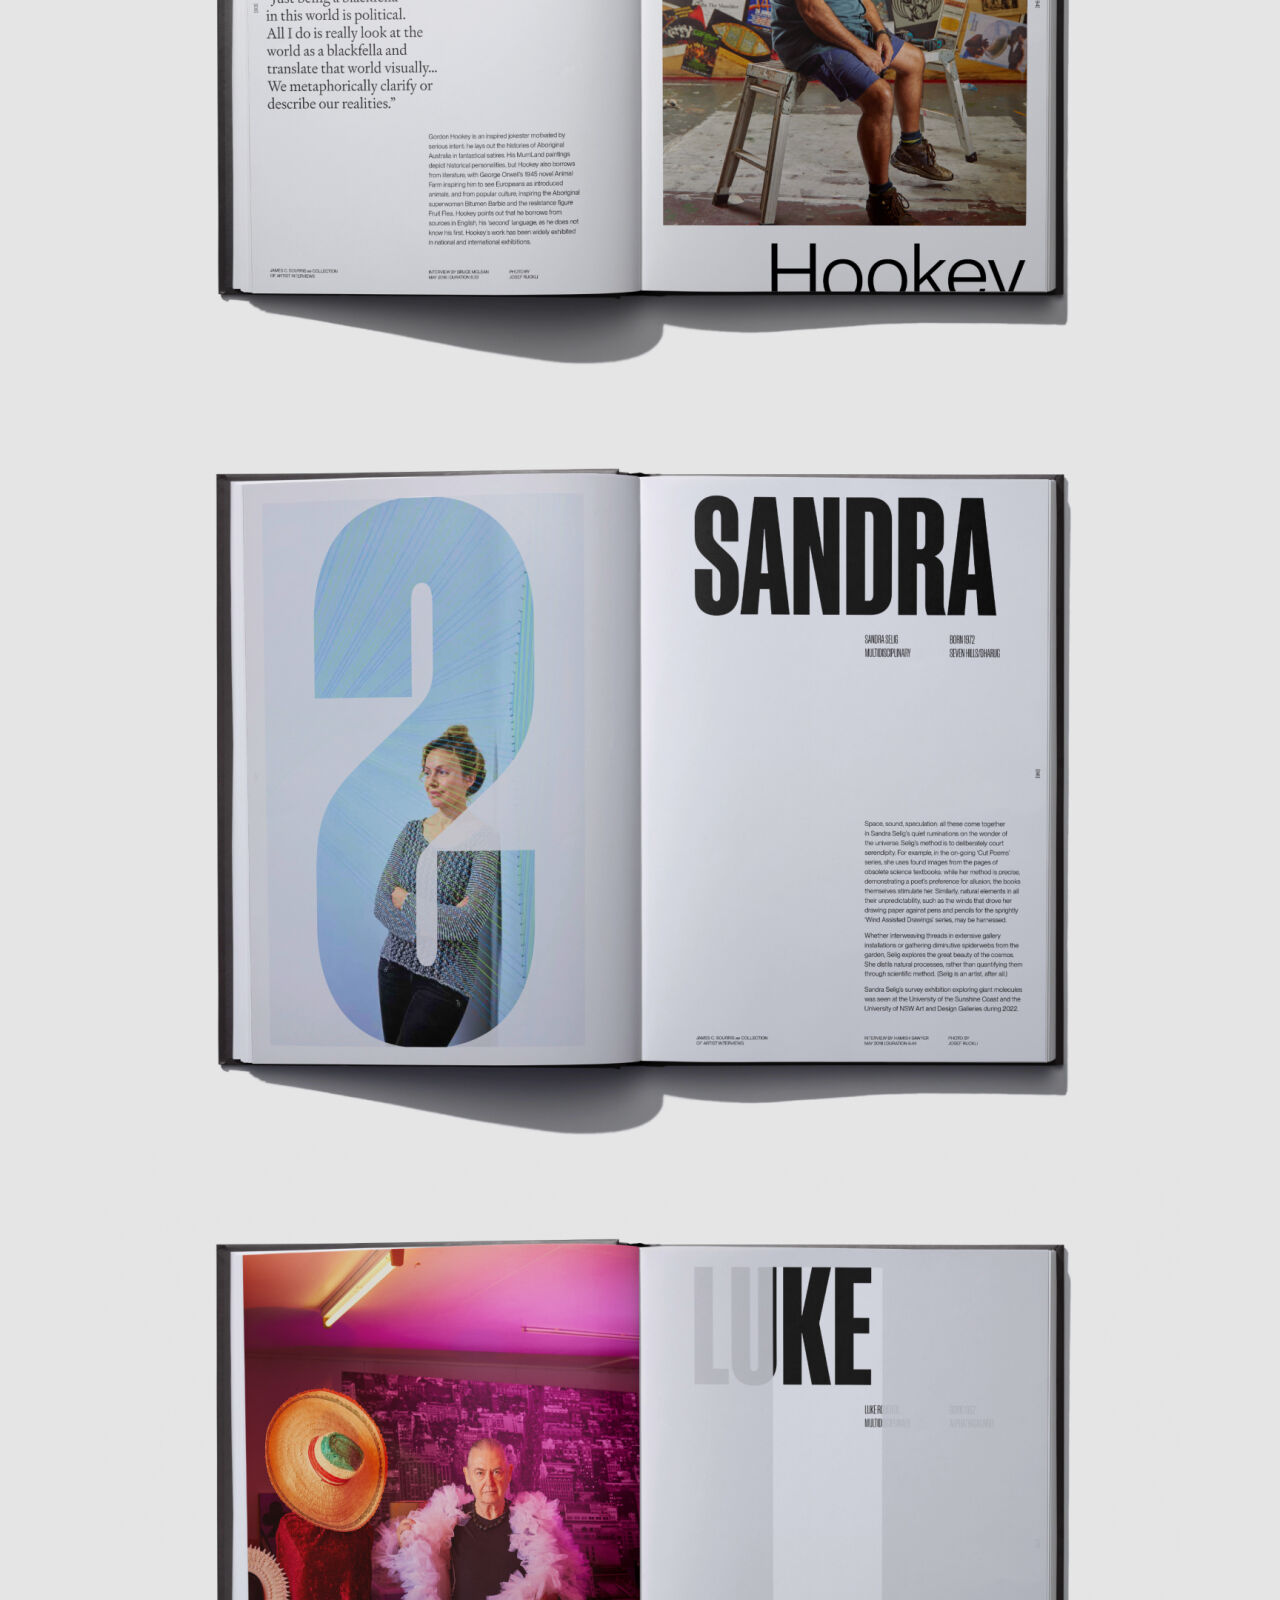 Collection of spreads from the Meet The Artists publication design, featuring interesting layouts and typography.